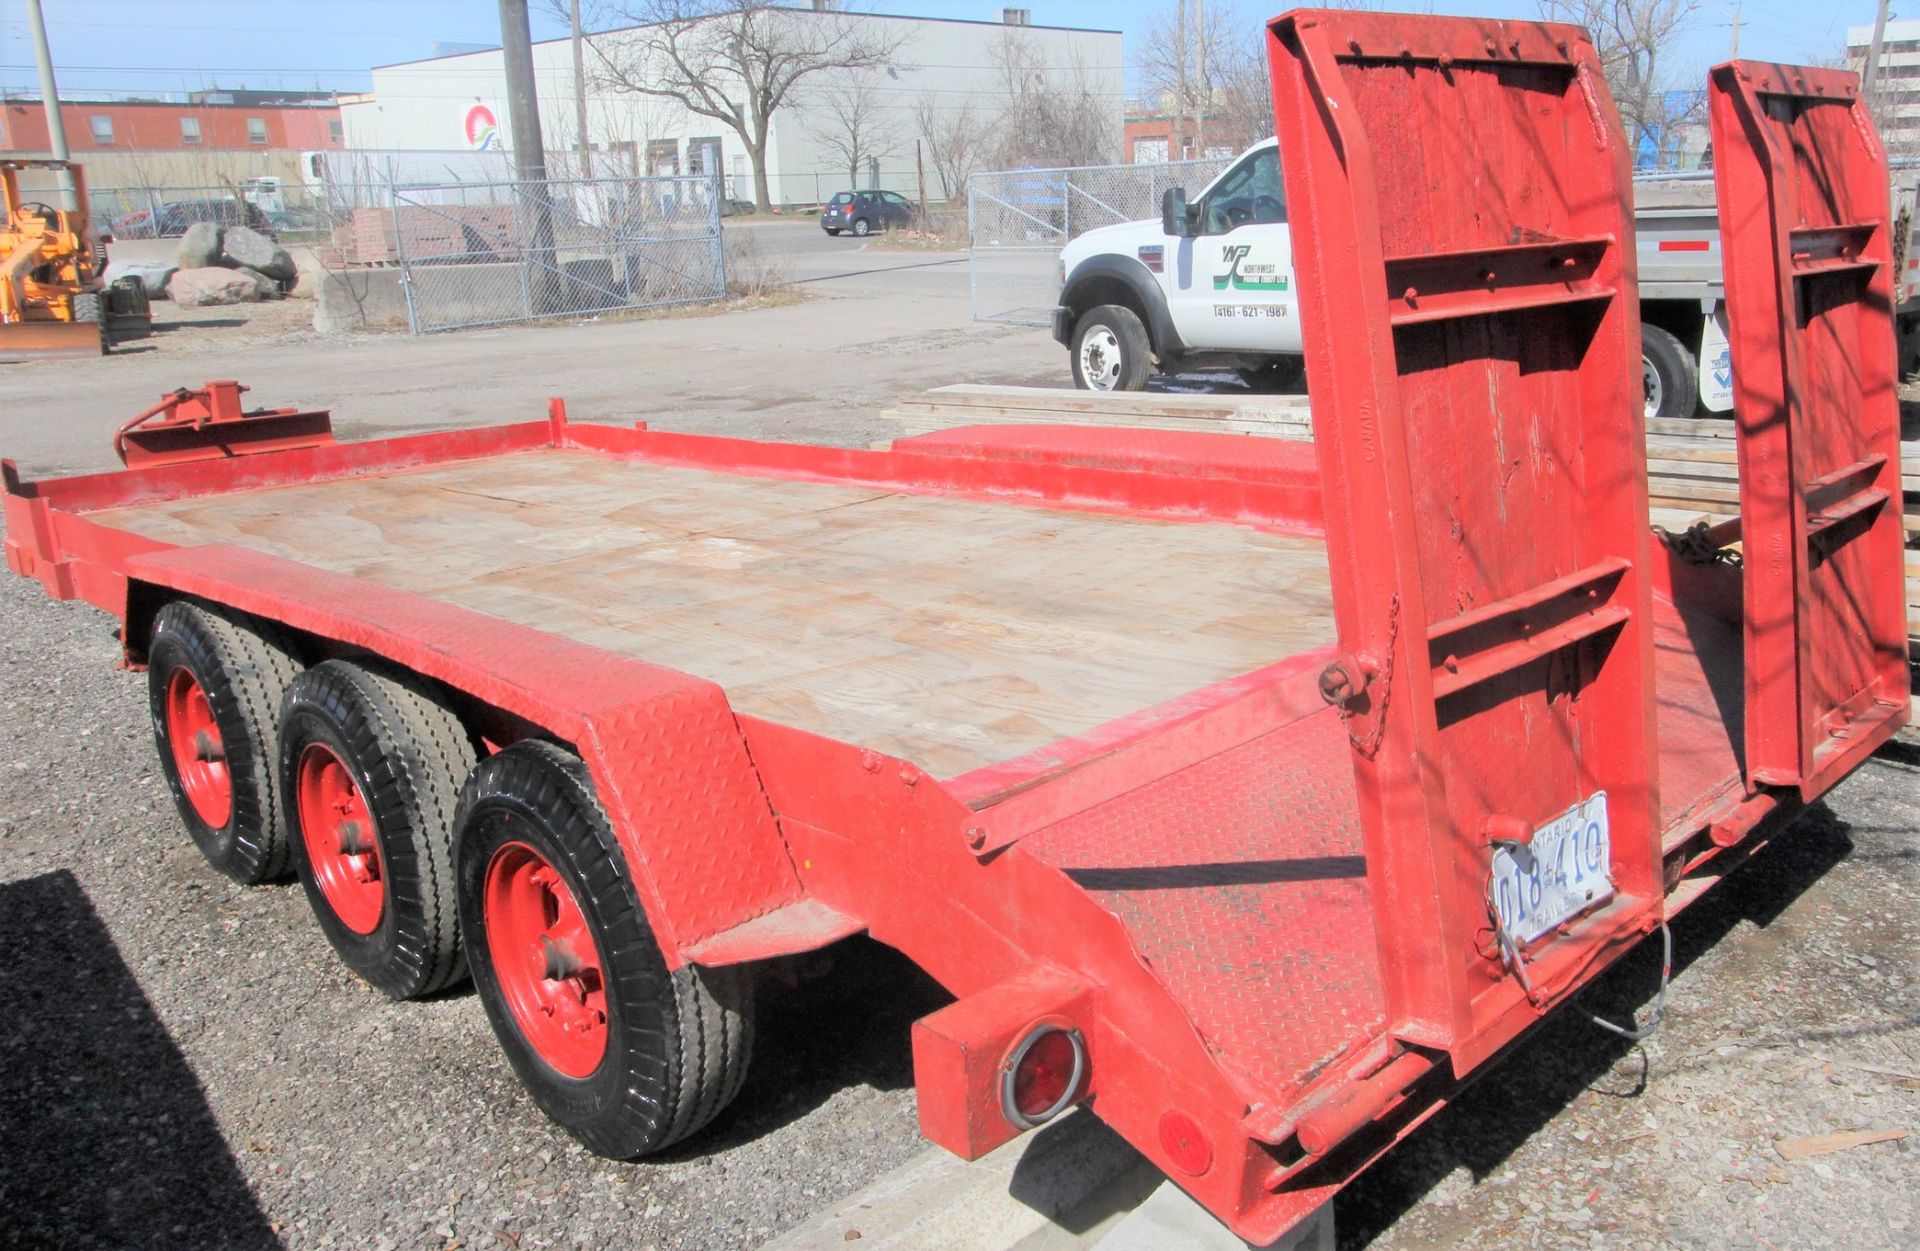 J.C. TRAILERS 18' TRI-AXLE EQUIPMENT TRAILER, 18,000 LBS. MAX CAPACITY, WOOD DECK, SPRING - Image 8 of 8